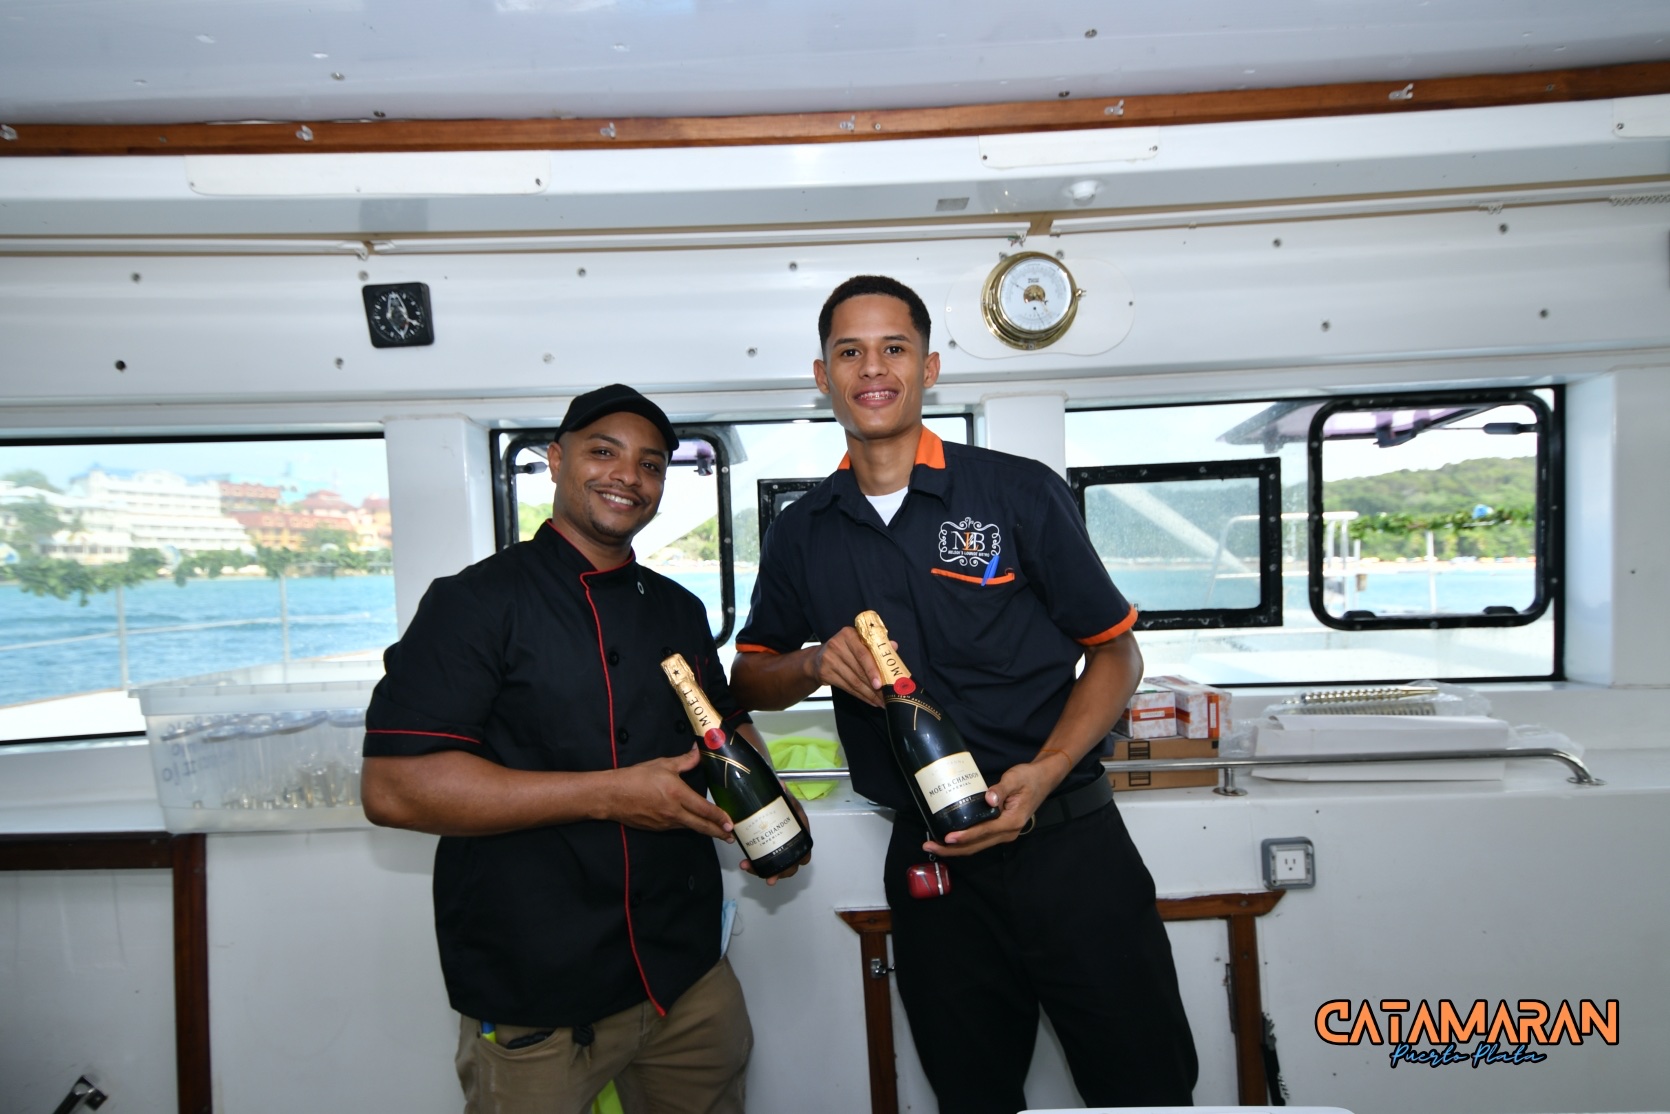 waiters with Moet bottles at the catamaran